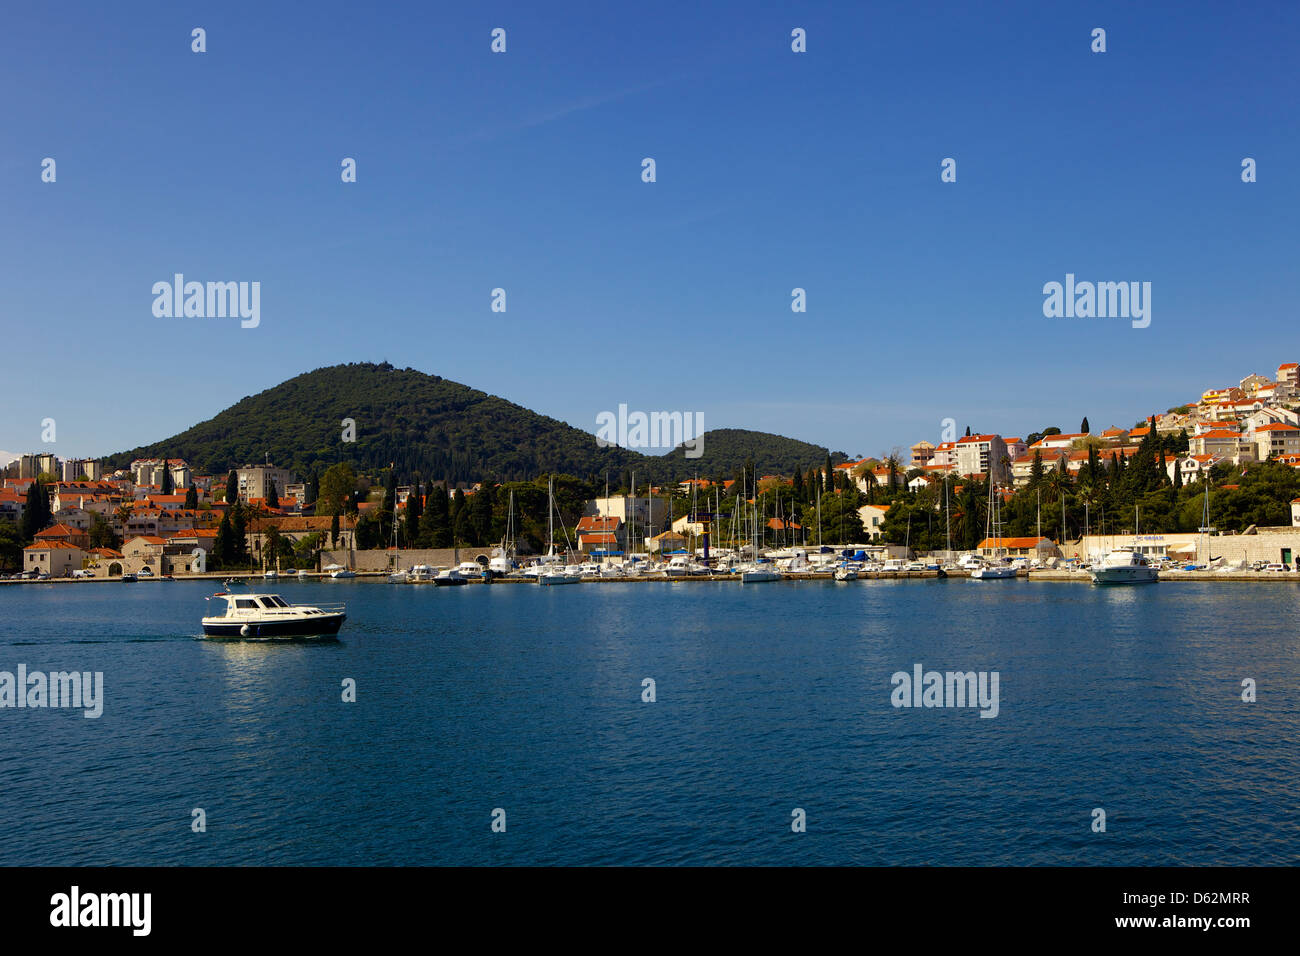 Villas along the coast. And hilltops in the background. Luka Gruz harbour, Dubrovnik, Croatia, Europe Stock Photo